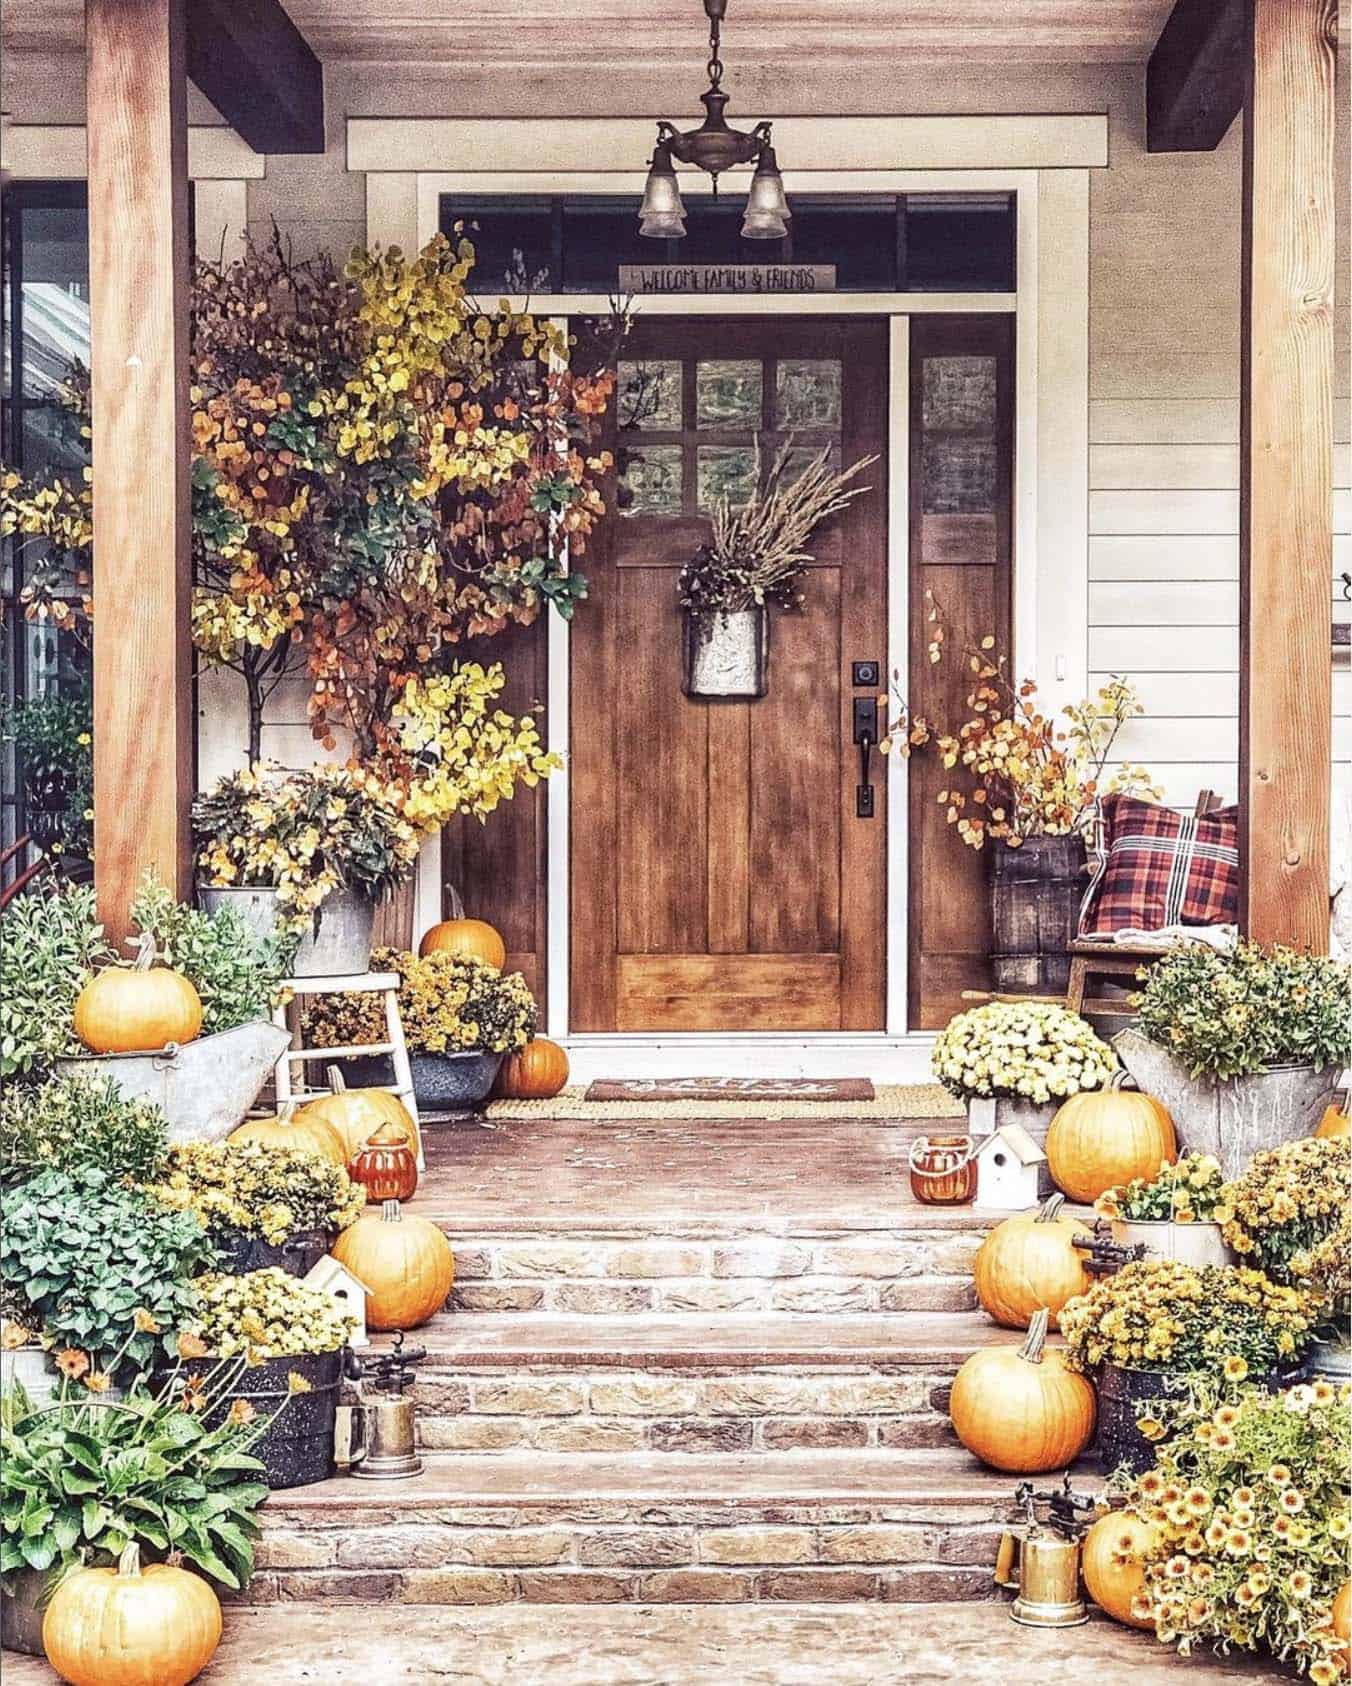 rustic fall porch with pumpkins and baskets full of mums